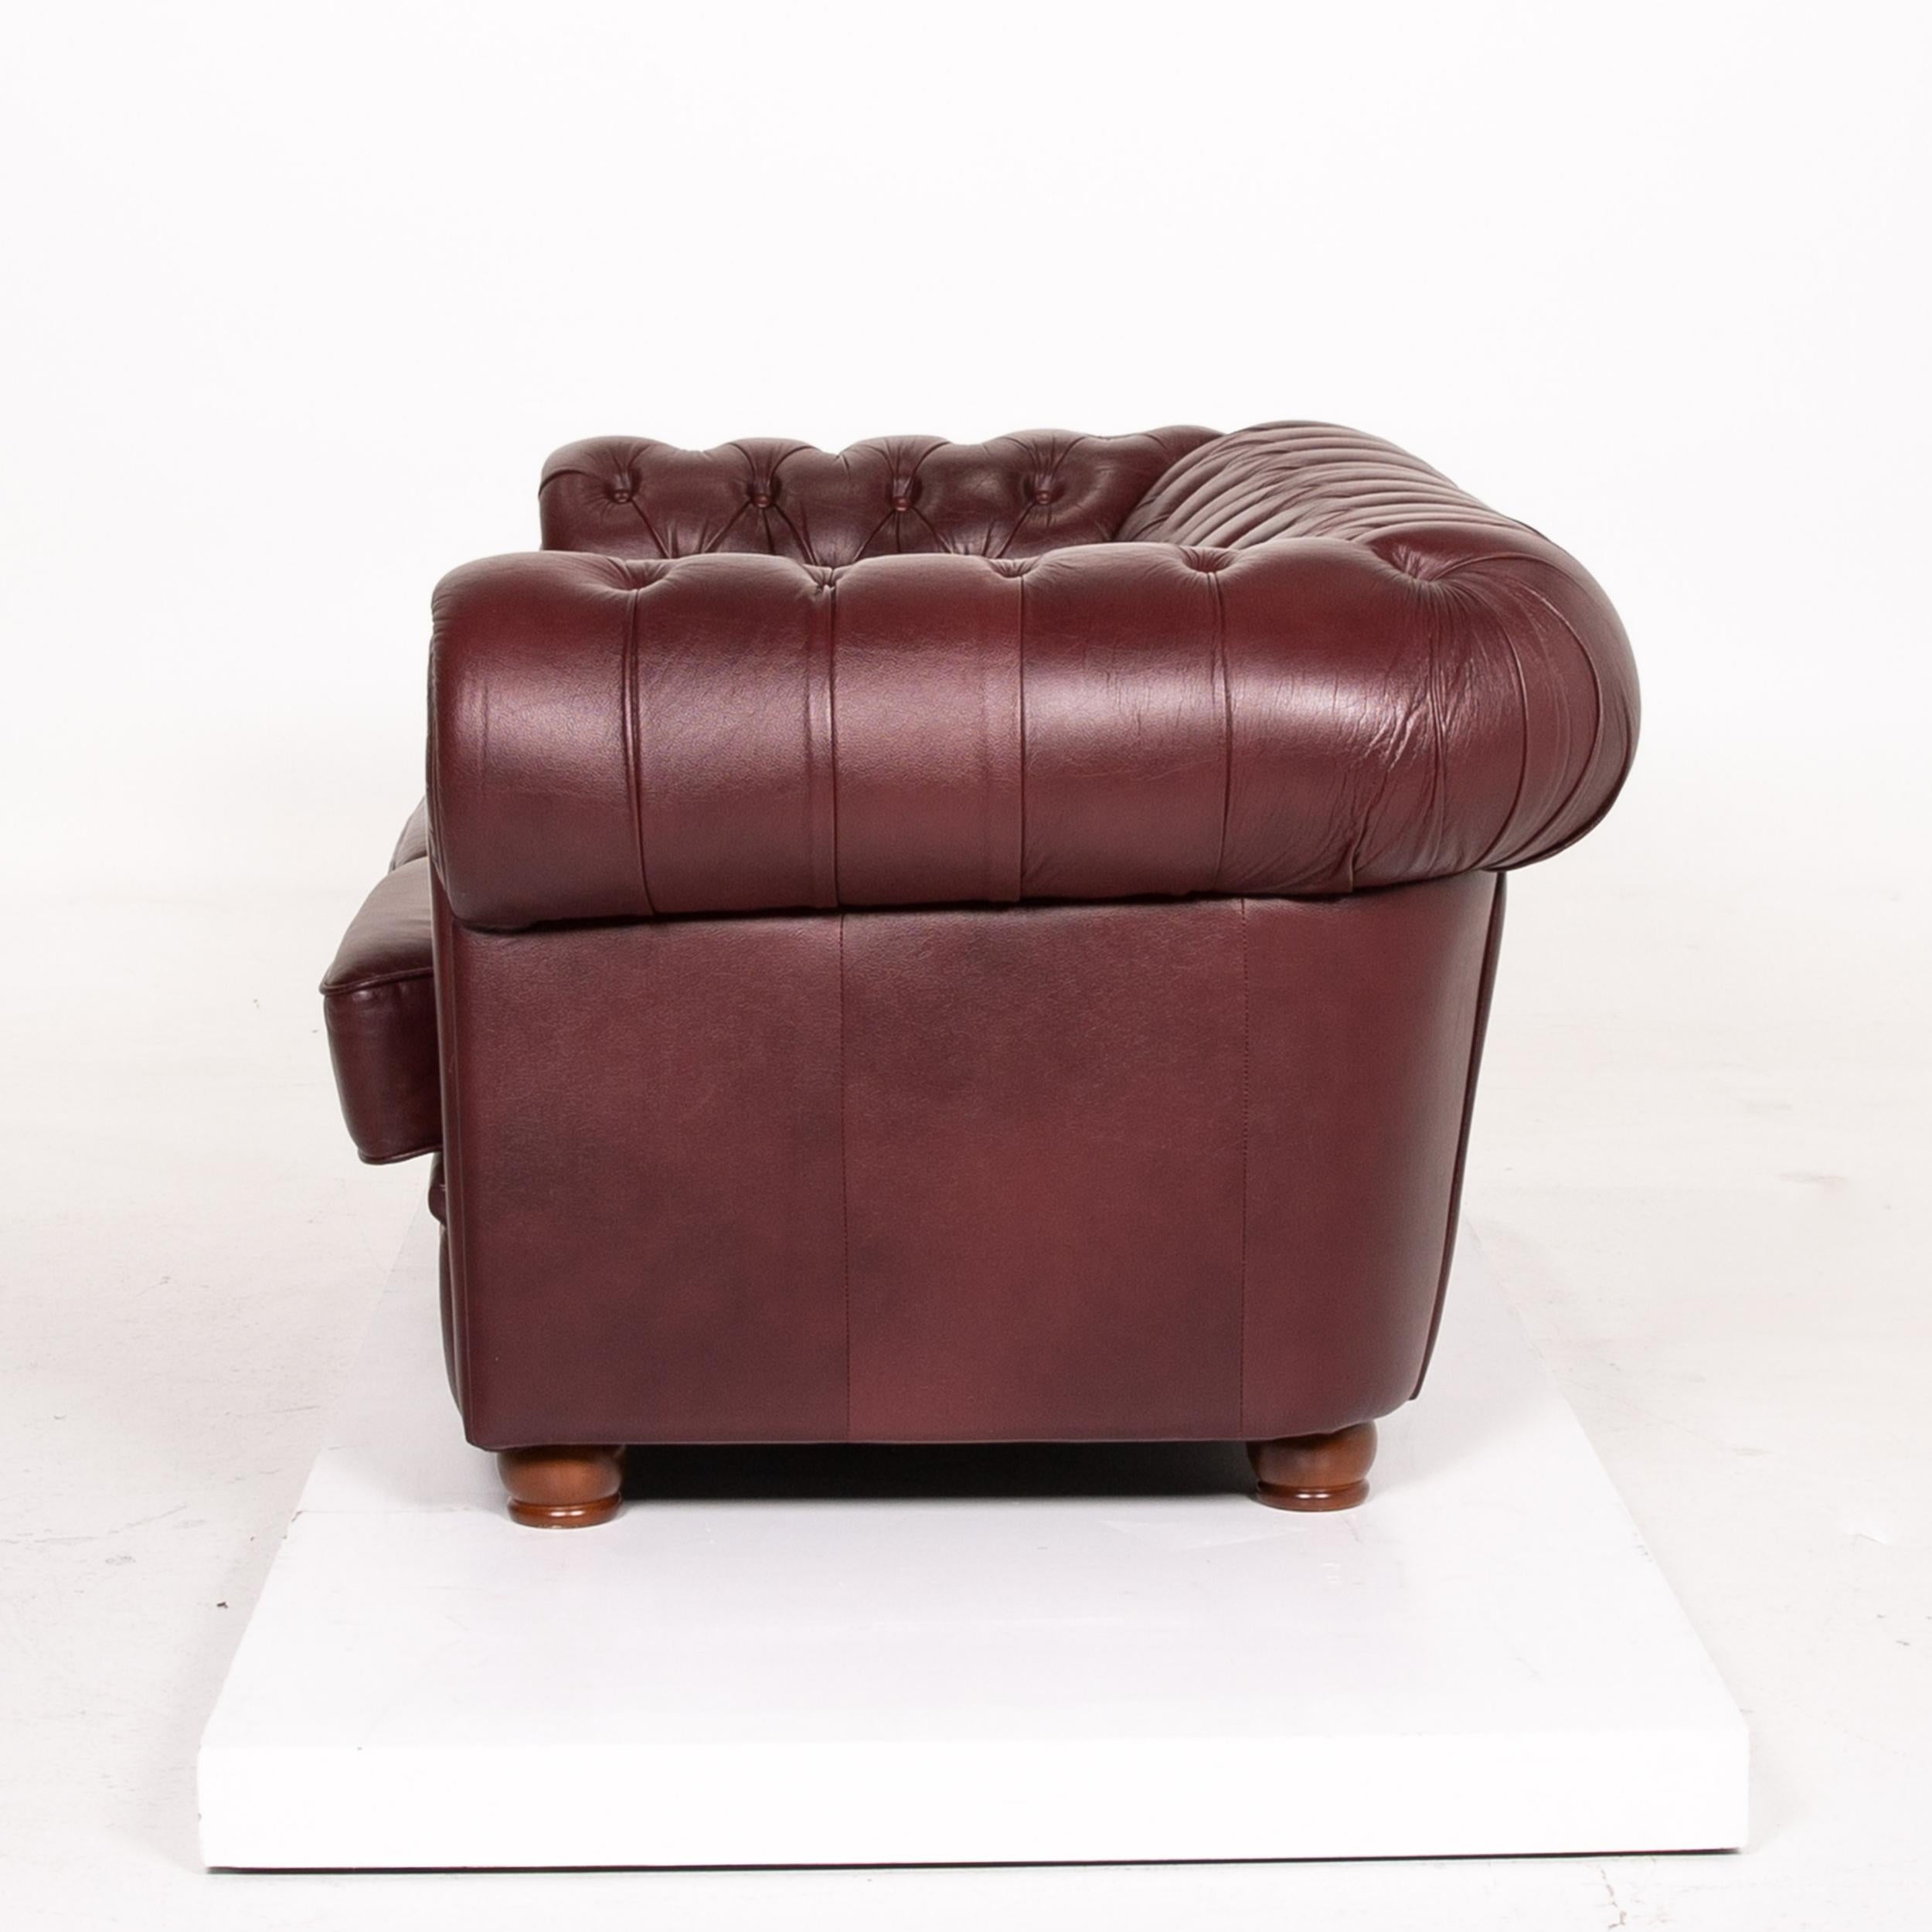 Chesterfield Leather Sofa Bordeaux Red Two-Seat Vintage Retro Couch For Sale 1